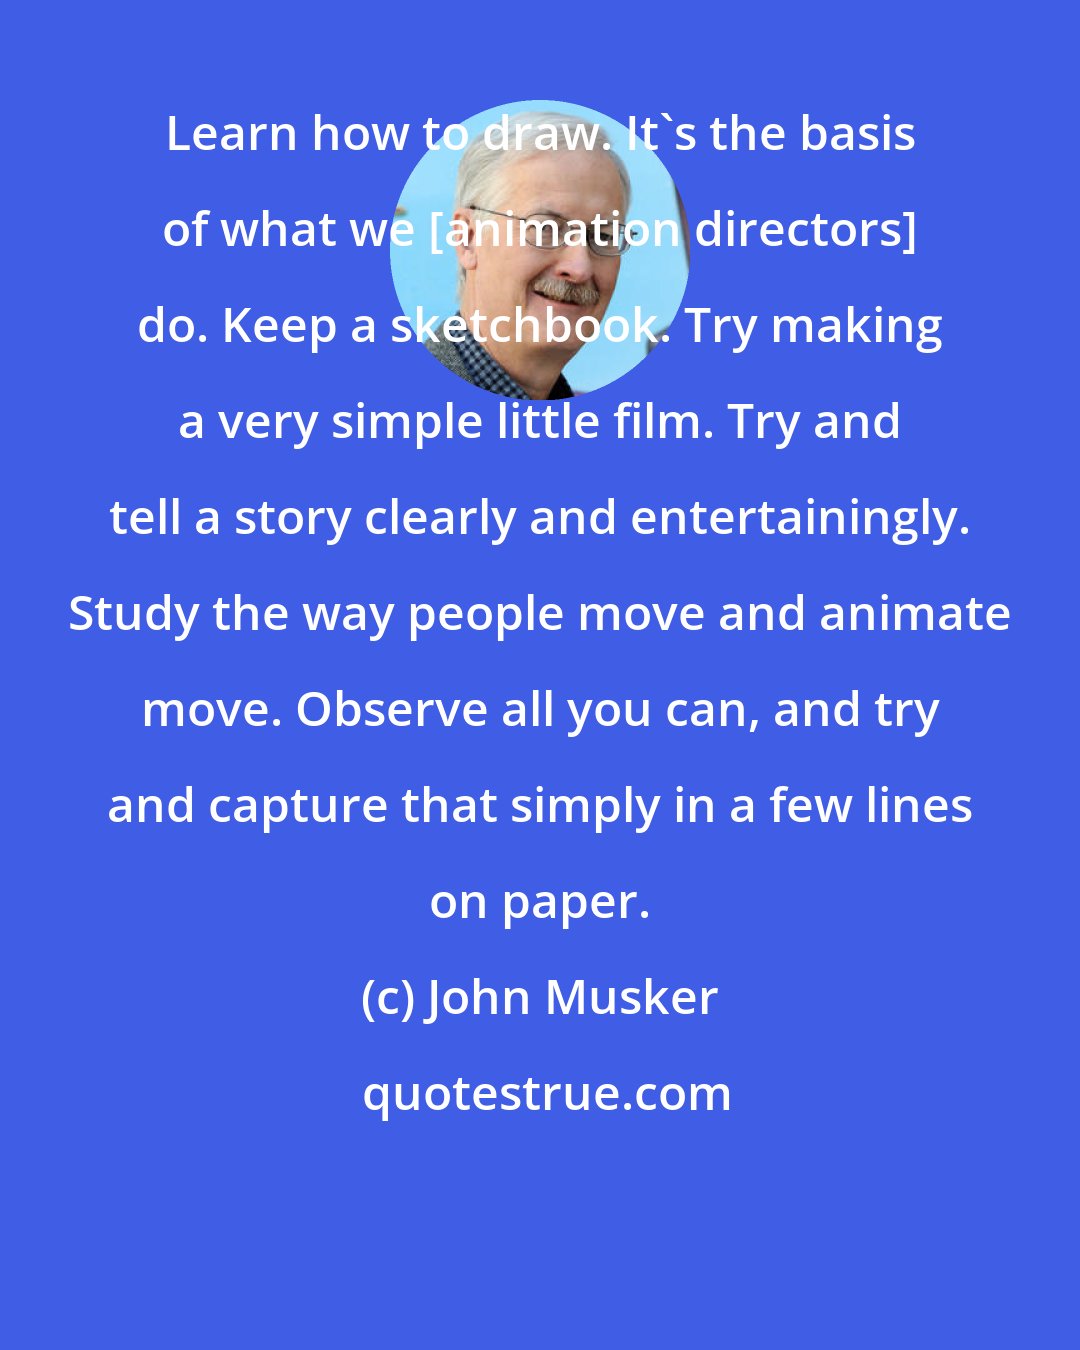 John Musker: Learn how to draw. It's the basis of what we [animation directors] do. Keep a sketchbook. Try making a very simple little film. Try and tell a story clearly and entertainingly. Study the way people move and animate move. Observe all you can, and try and capture that simply in a few lines on paper.